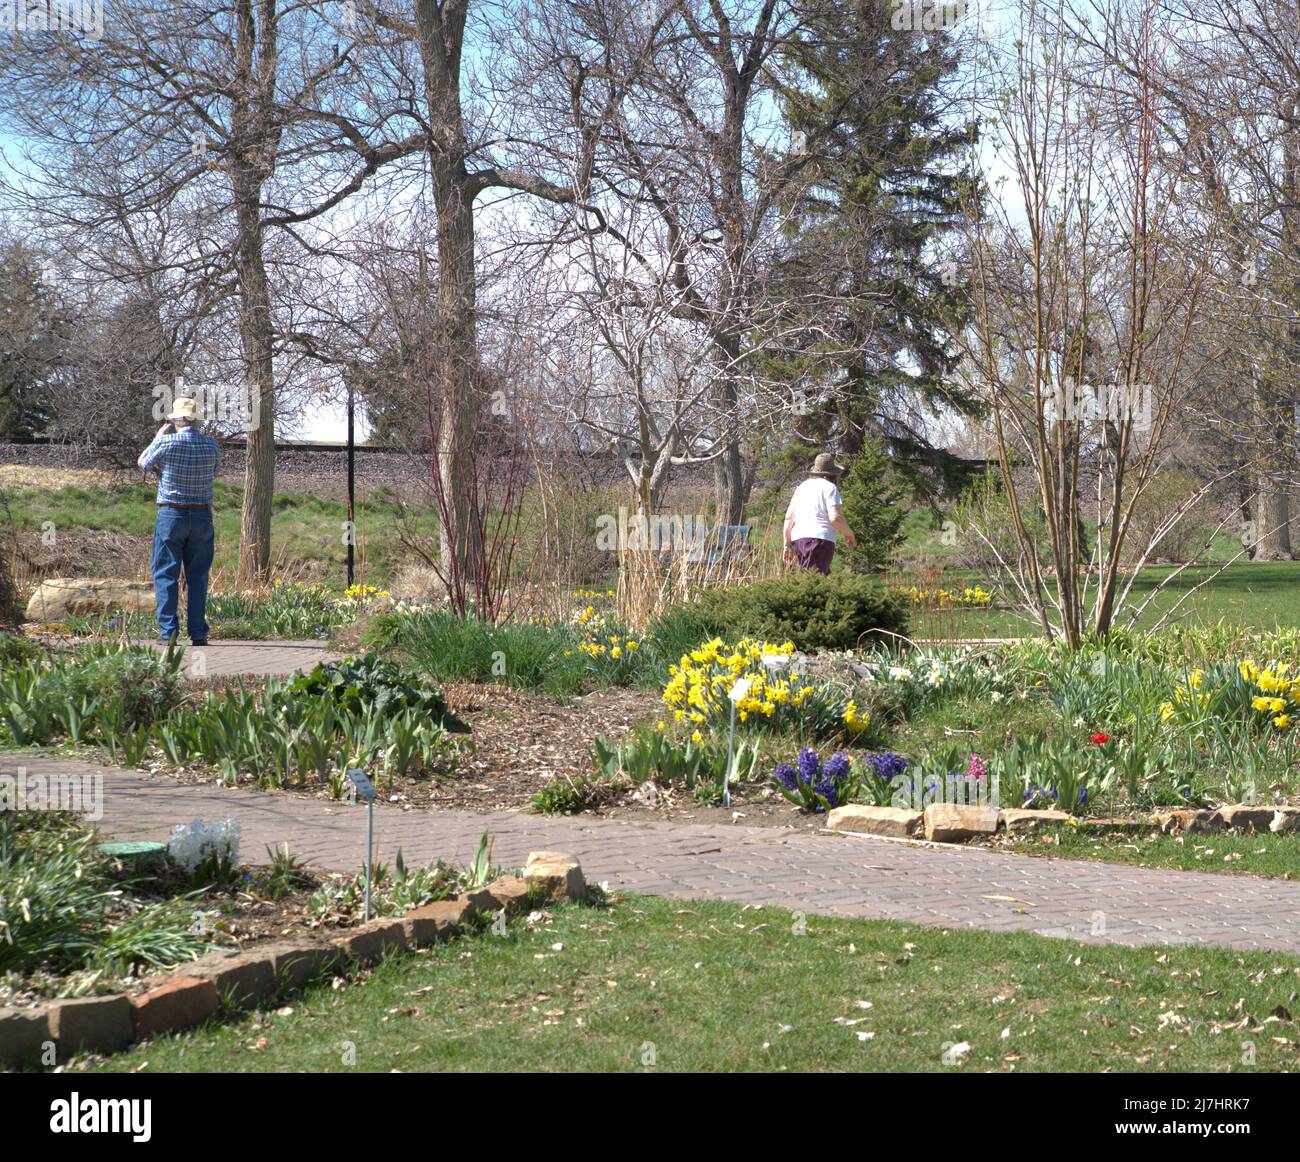 A public park with visitors enjoying the spring flowers. Stock Photo